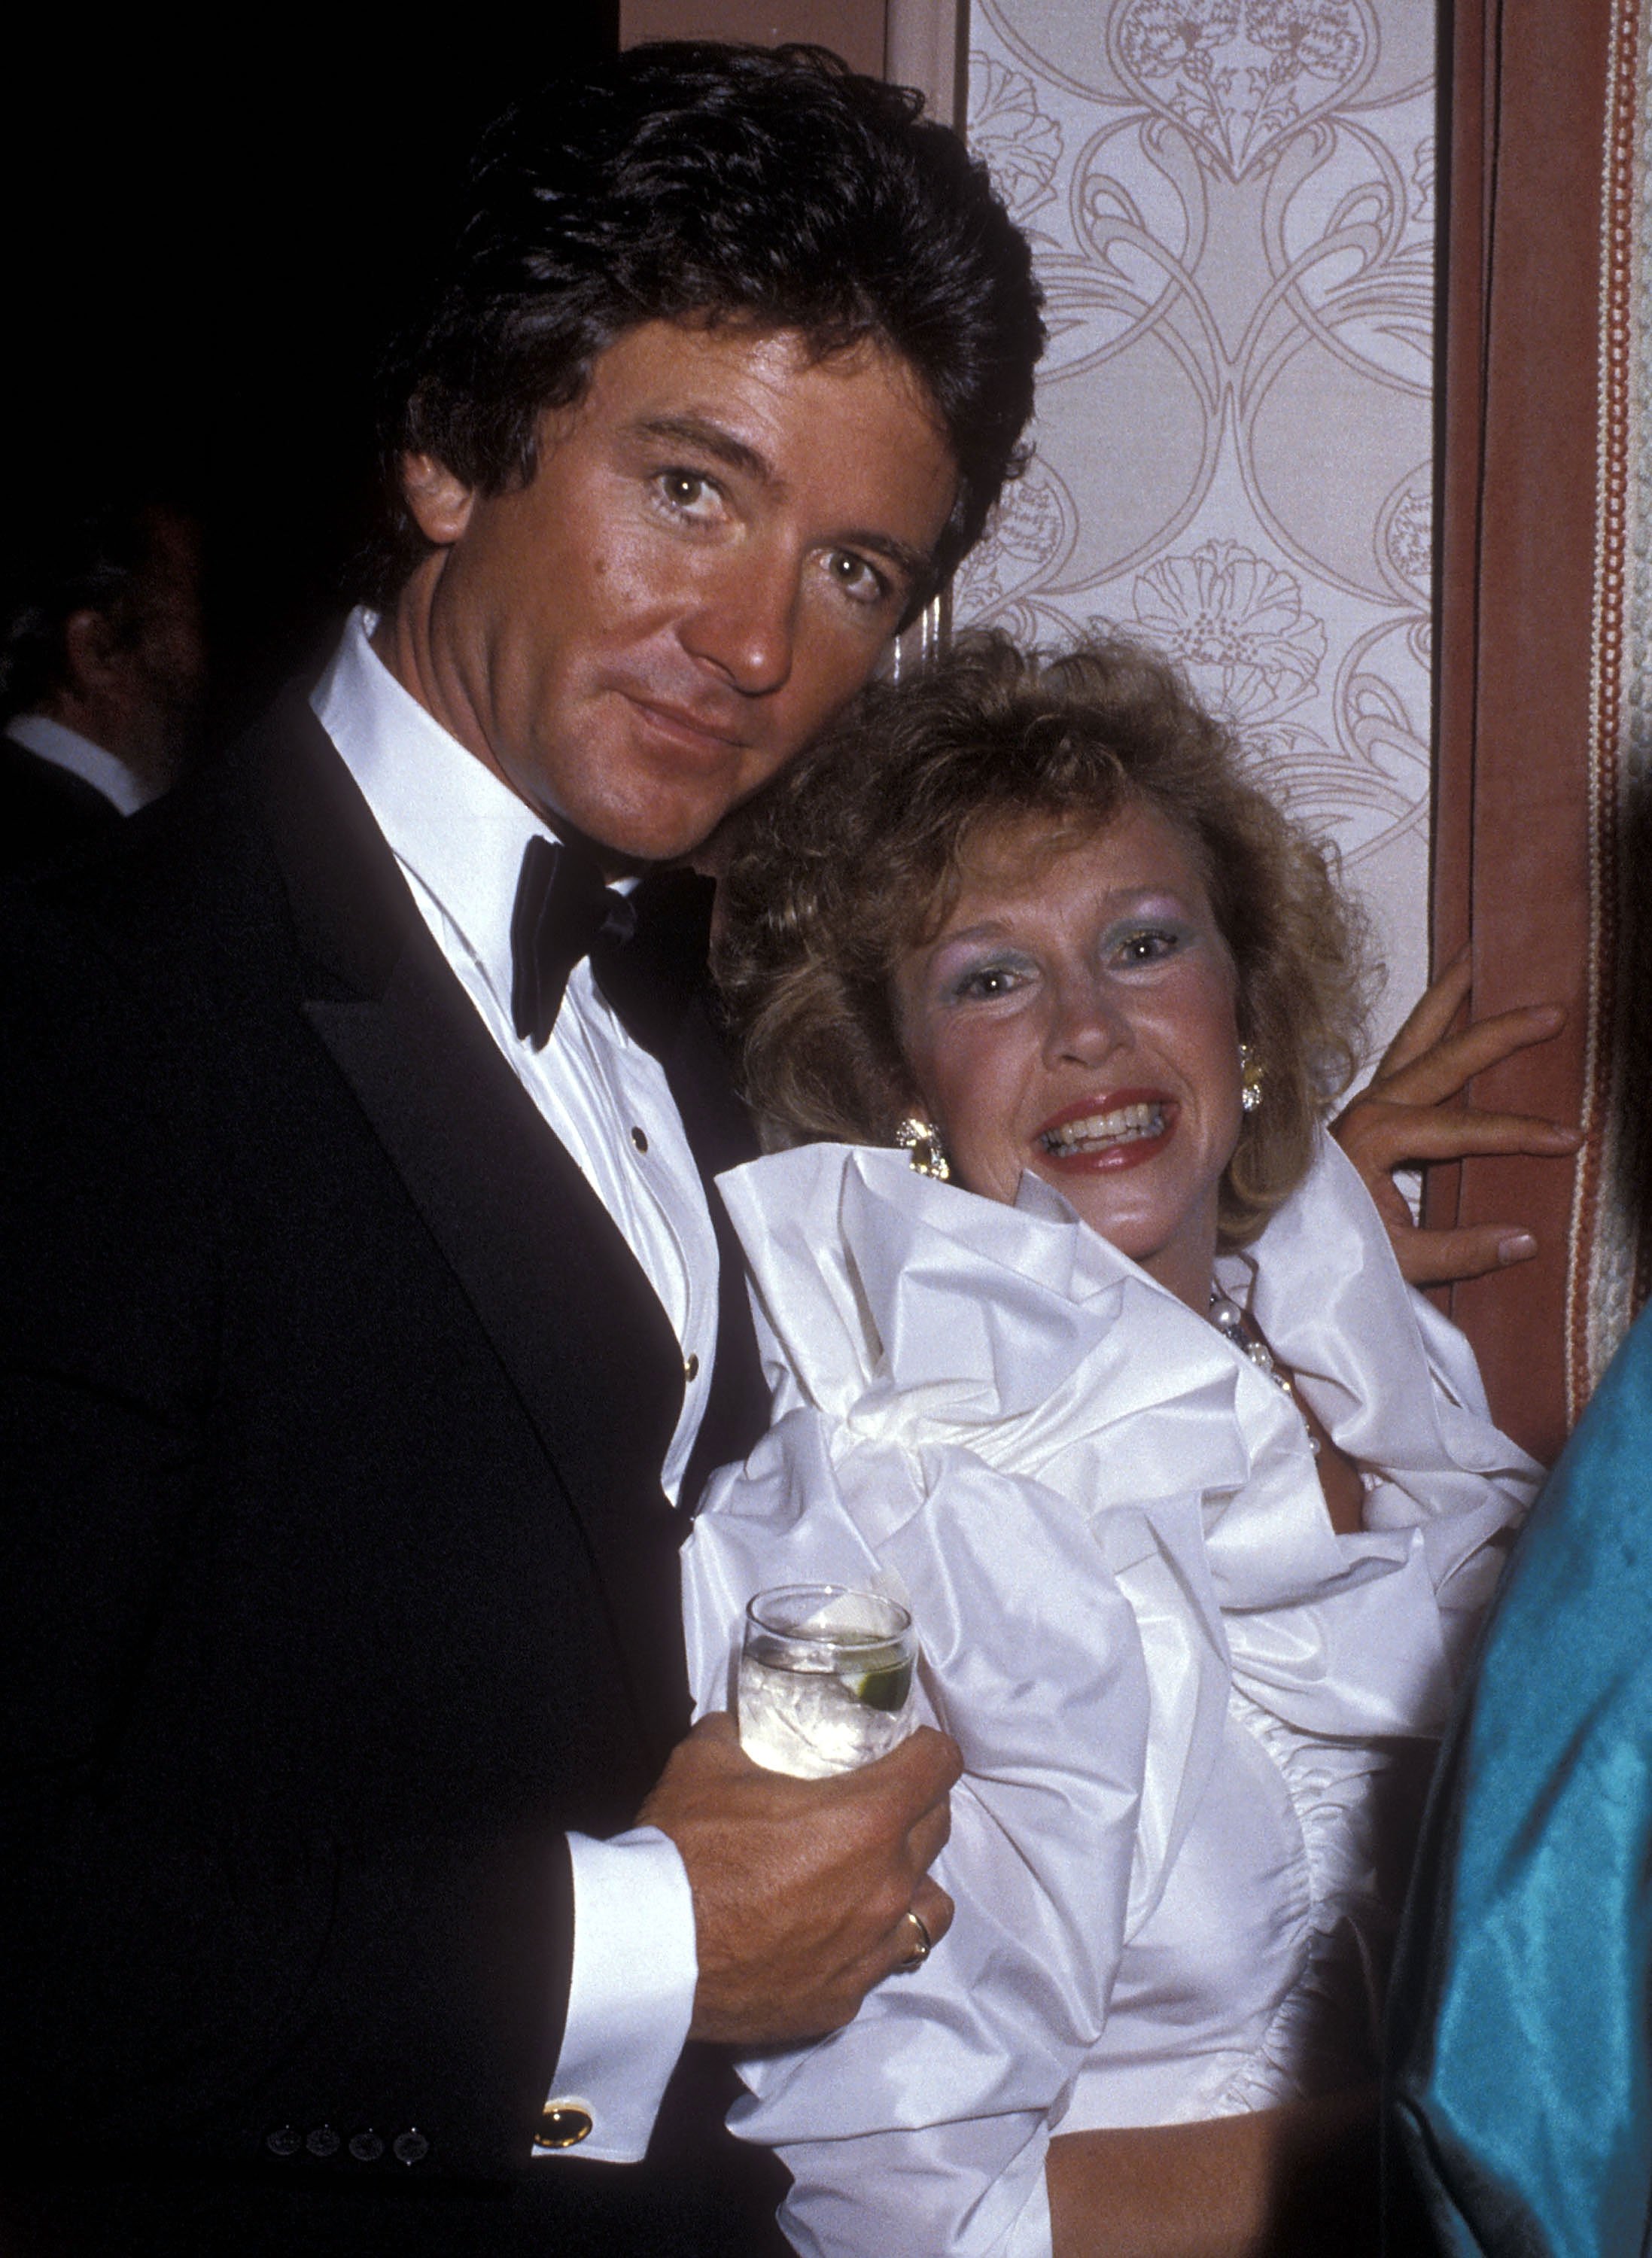 Patrick Duffy and his wife Carlyn attend Aaron Spelling, and Douglas S. Cramer hosts a reveal party "the love boat" The 1,000th Guest Star on March 31, 1985 at the Beverly Hilton Hotel in Beverly Hills, California.  |  Source: Getty Images